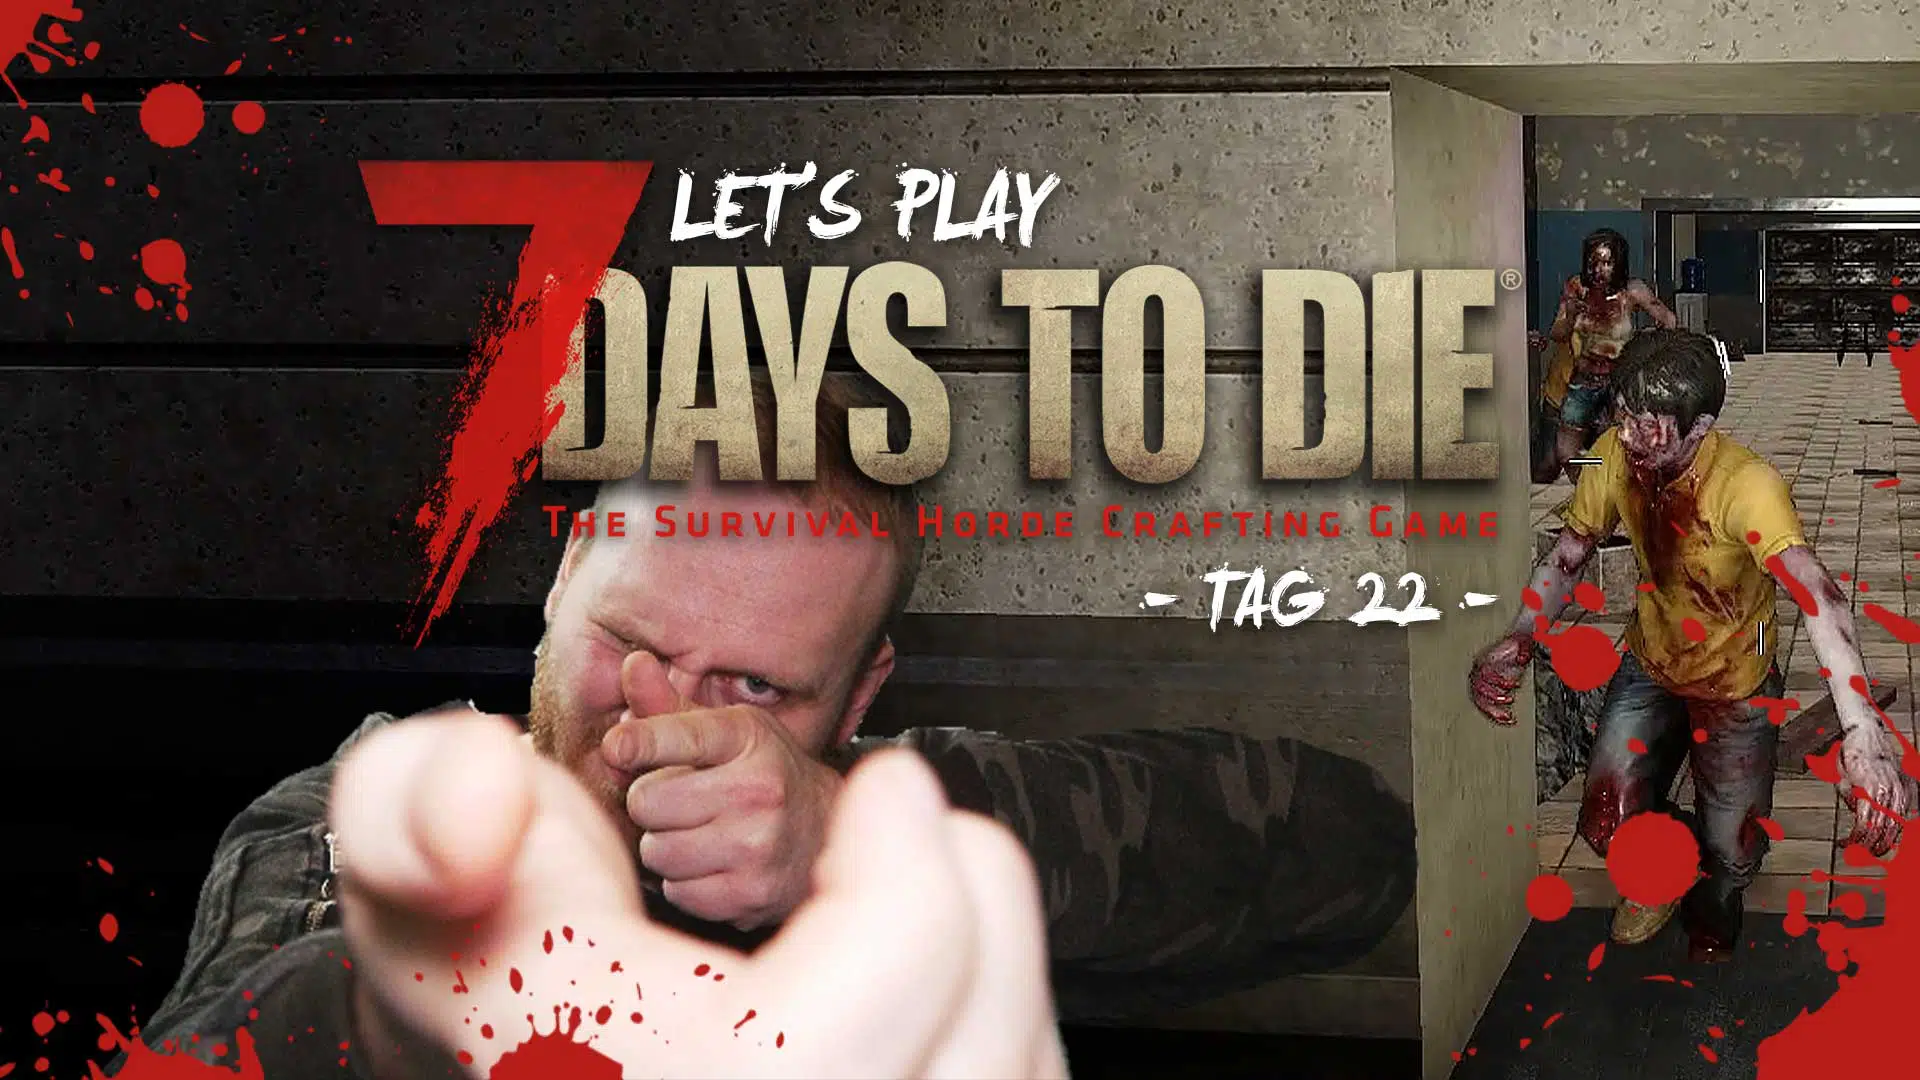 lets play 7 days to die tag 22 GG